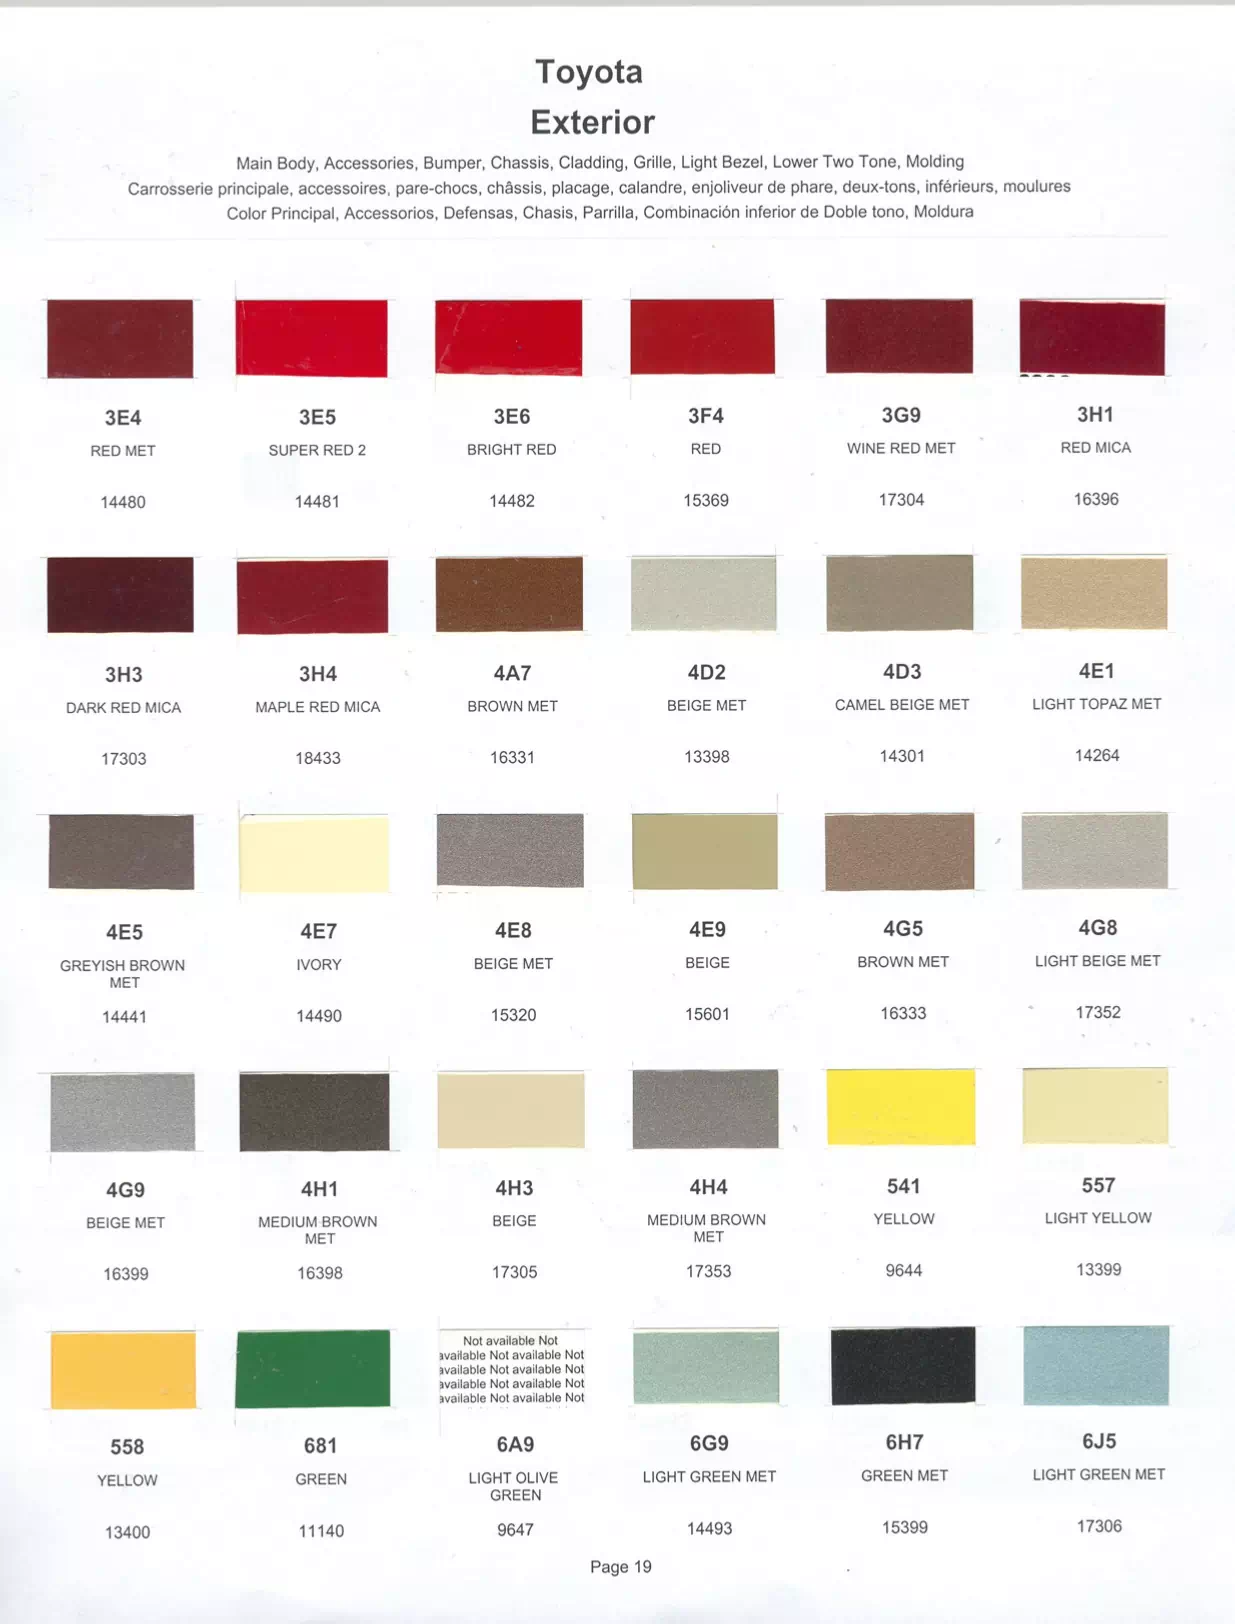 Paint color examples, their ordering codes, the oem color code, and vehicles the color was used on